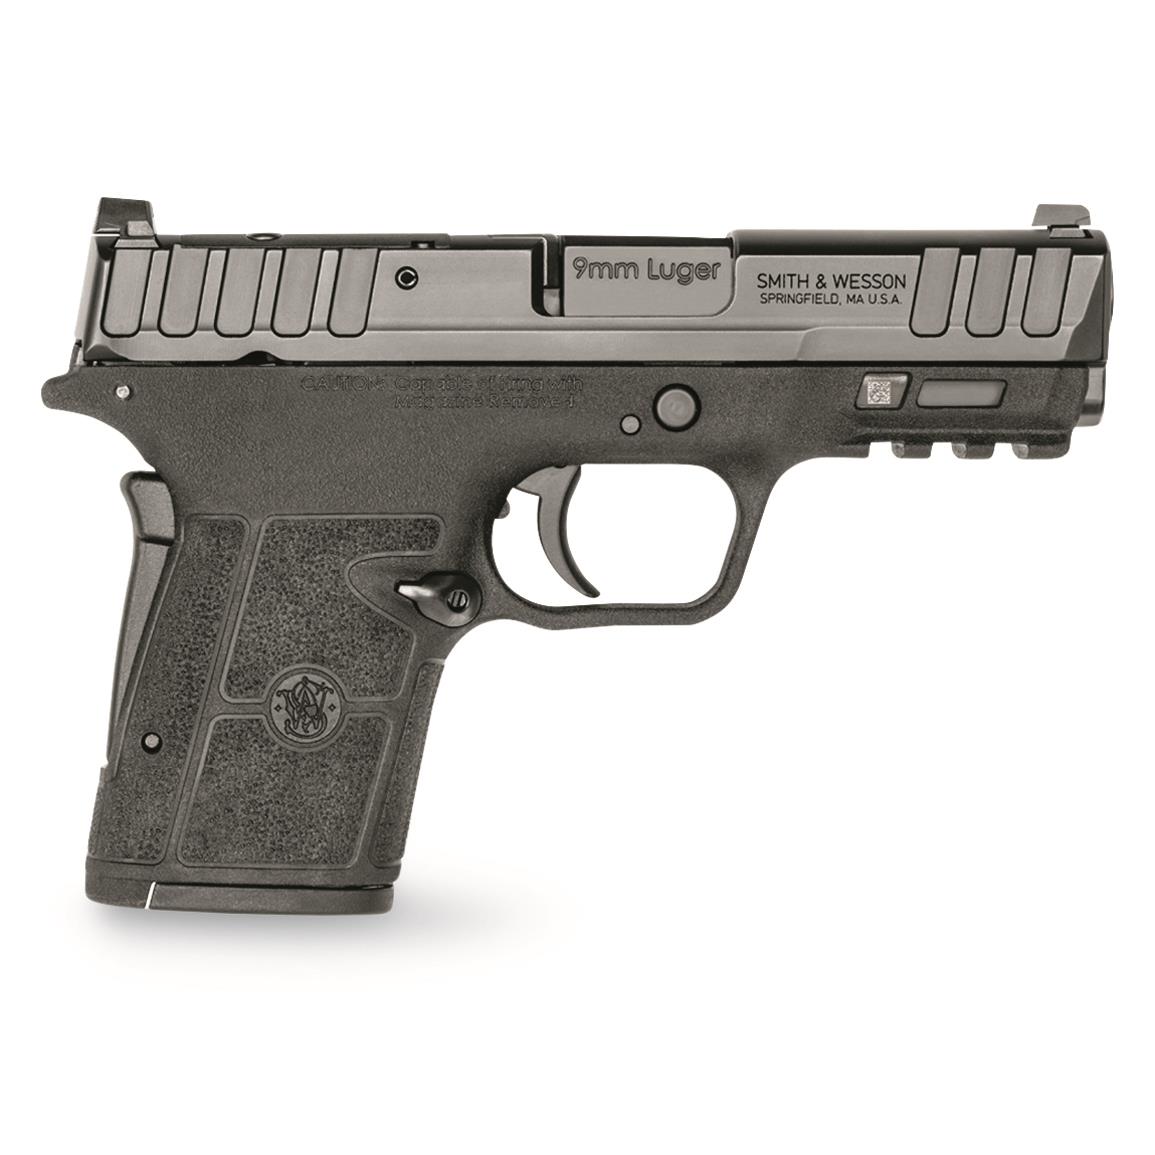 Smith & Wesson Equalizer Micro-Compact, Semi-auto, 9mm, 3.675" BBL, 15+1 Rds., No Thumb Safety